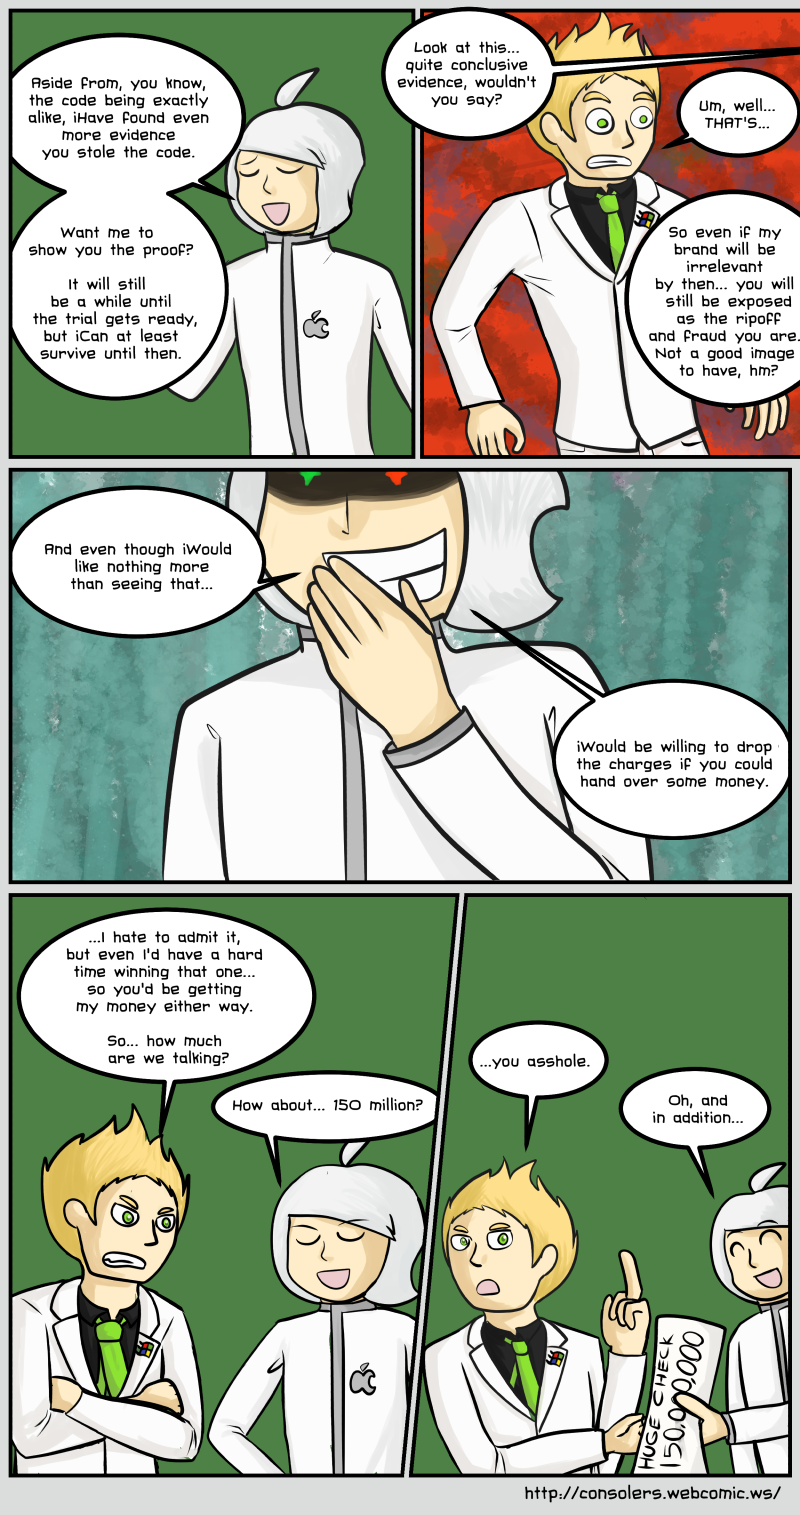 iNeed More Money - page 3